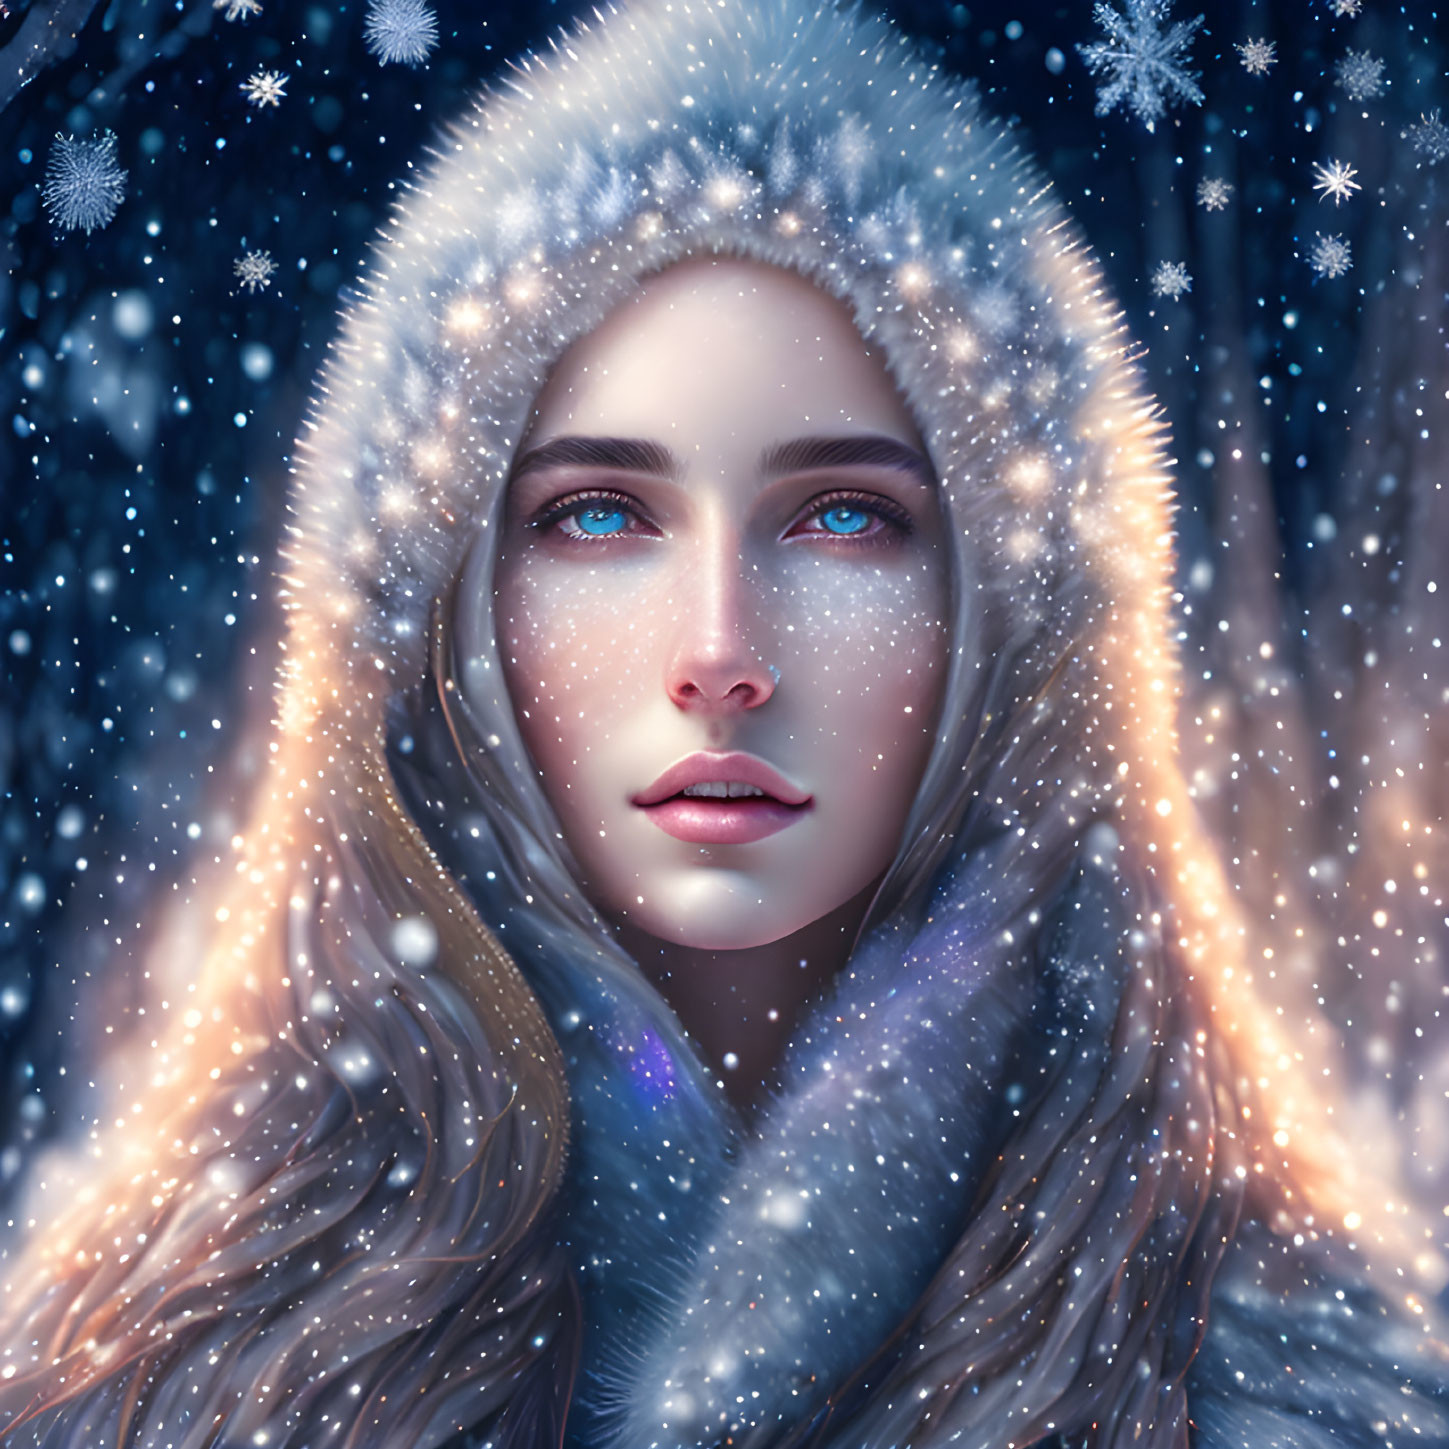 Digital Art Portrait of Woman with Blue Eyes and Hood in Snowy Setting